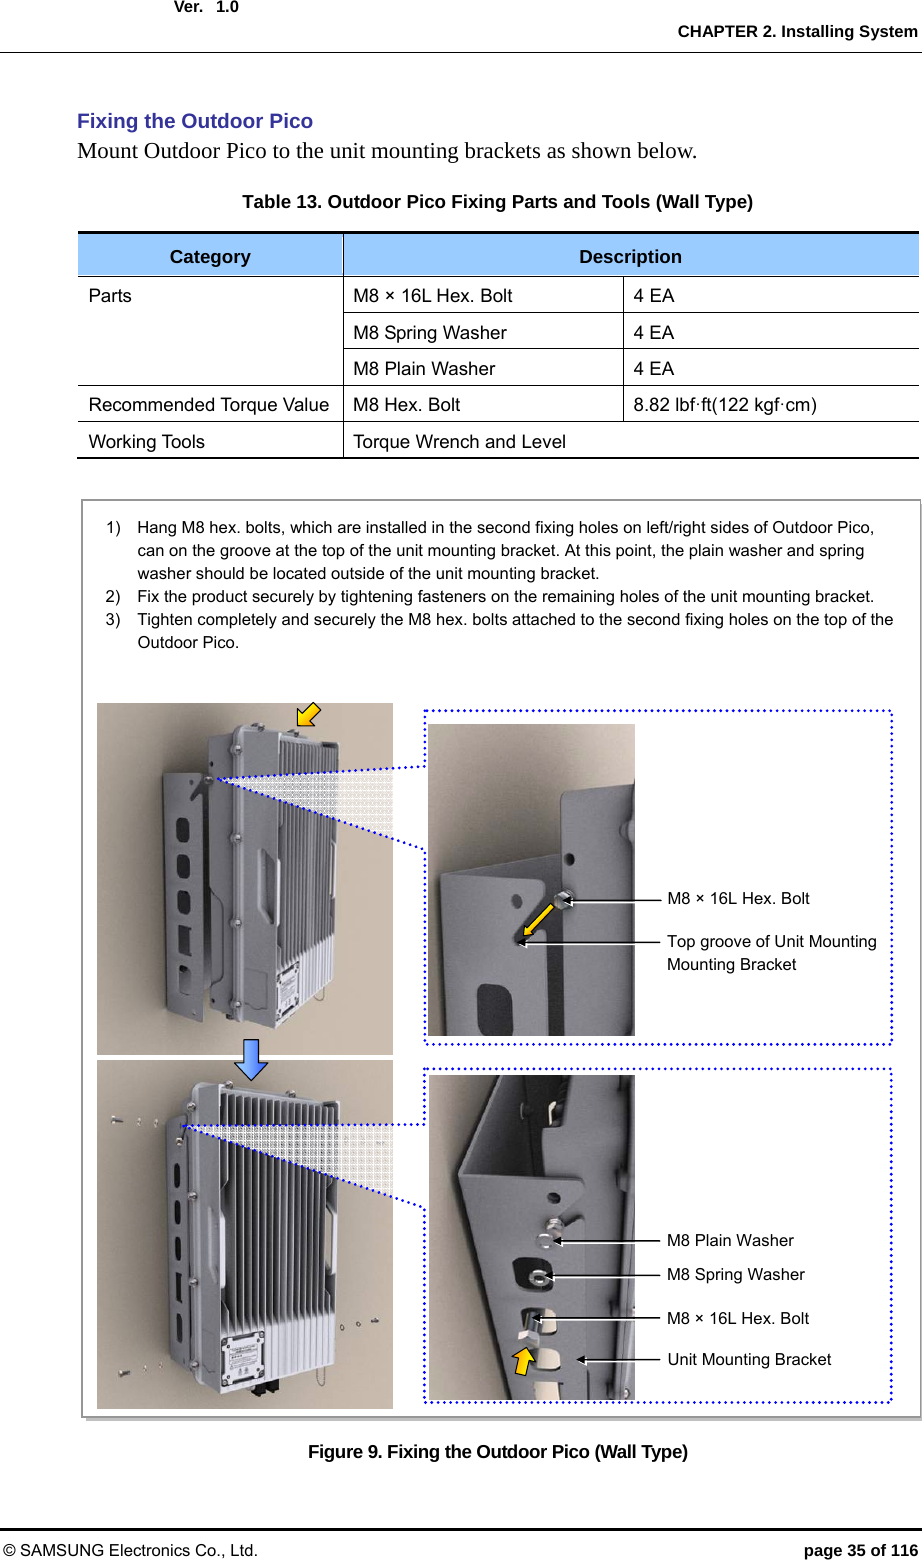  Ver.  CHAPTER 2. Installing System © SAMSUNG Electronics Co., Ltd.  page 35 of 116 1.0 Fixing the Outdoor Pico Mount Outdoor Pico to the unit mounting brackets as shown below.  Table 13. Outdoor Pico Fixing Parts and Tools (Wall Type)   Category  Description Parts  M8 × 16L Hex. Bolt  4 EA M8 Spring Washer  4 EA M8 Plain Washer  4 EA Recommended Torque Value  M8 Hex. Bolt  8.82 lbf·ft(122 kgf·cm) Working Tools  Torque Wrench and Level  Figure 9. Fixing the Outdoor Pico (Wall Type)  1)    Hang M8 hex. bolts, which are installed in the second fixing holes on left/right sides of Outdoor Pico, can on the groove at the top of the unit mounting bracket. At this point, the plain washer and spring washer should be located outside of the unit mounting bracket. 2)    Fix the product securely by tightening fasteners on the remaining holes of the unit mounting bracket. 3)    Tighten completely and securely the M8 hex. bolts attached to the second fixing holes on the top of the Outdoor Pico.   Top groove of Unit Mounting Mounting Bracket   M8 × 16L Hex. Bolt Unit Mounting Bracket M8 Plain Washer M8 Spring Washer M8 × 16L Hex. Bolt 